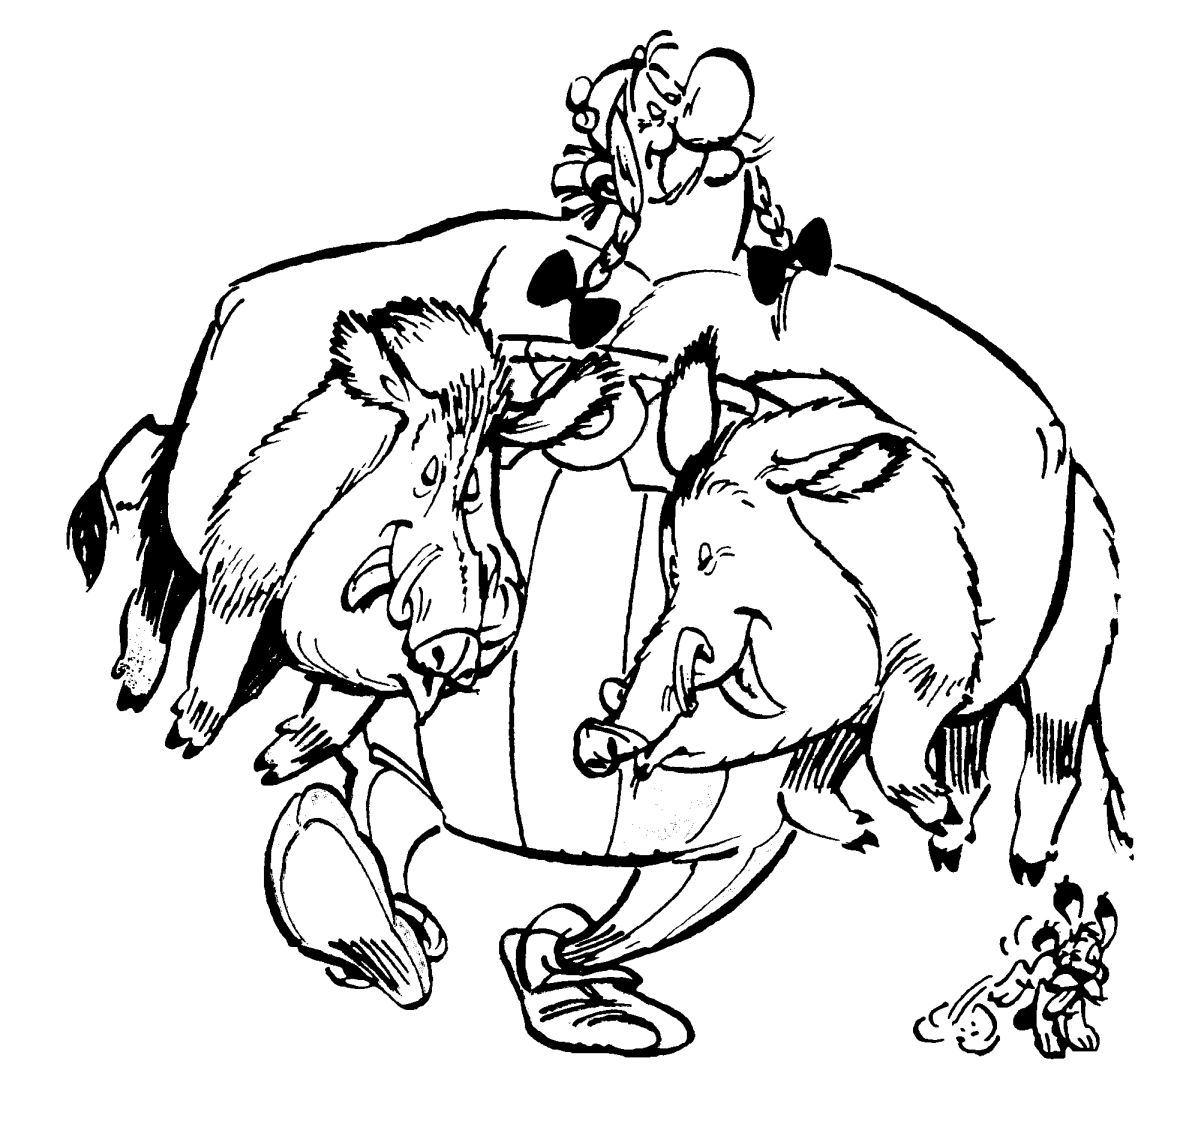 Coloring of Obelix who found a lot of boars for the banquet